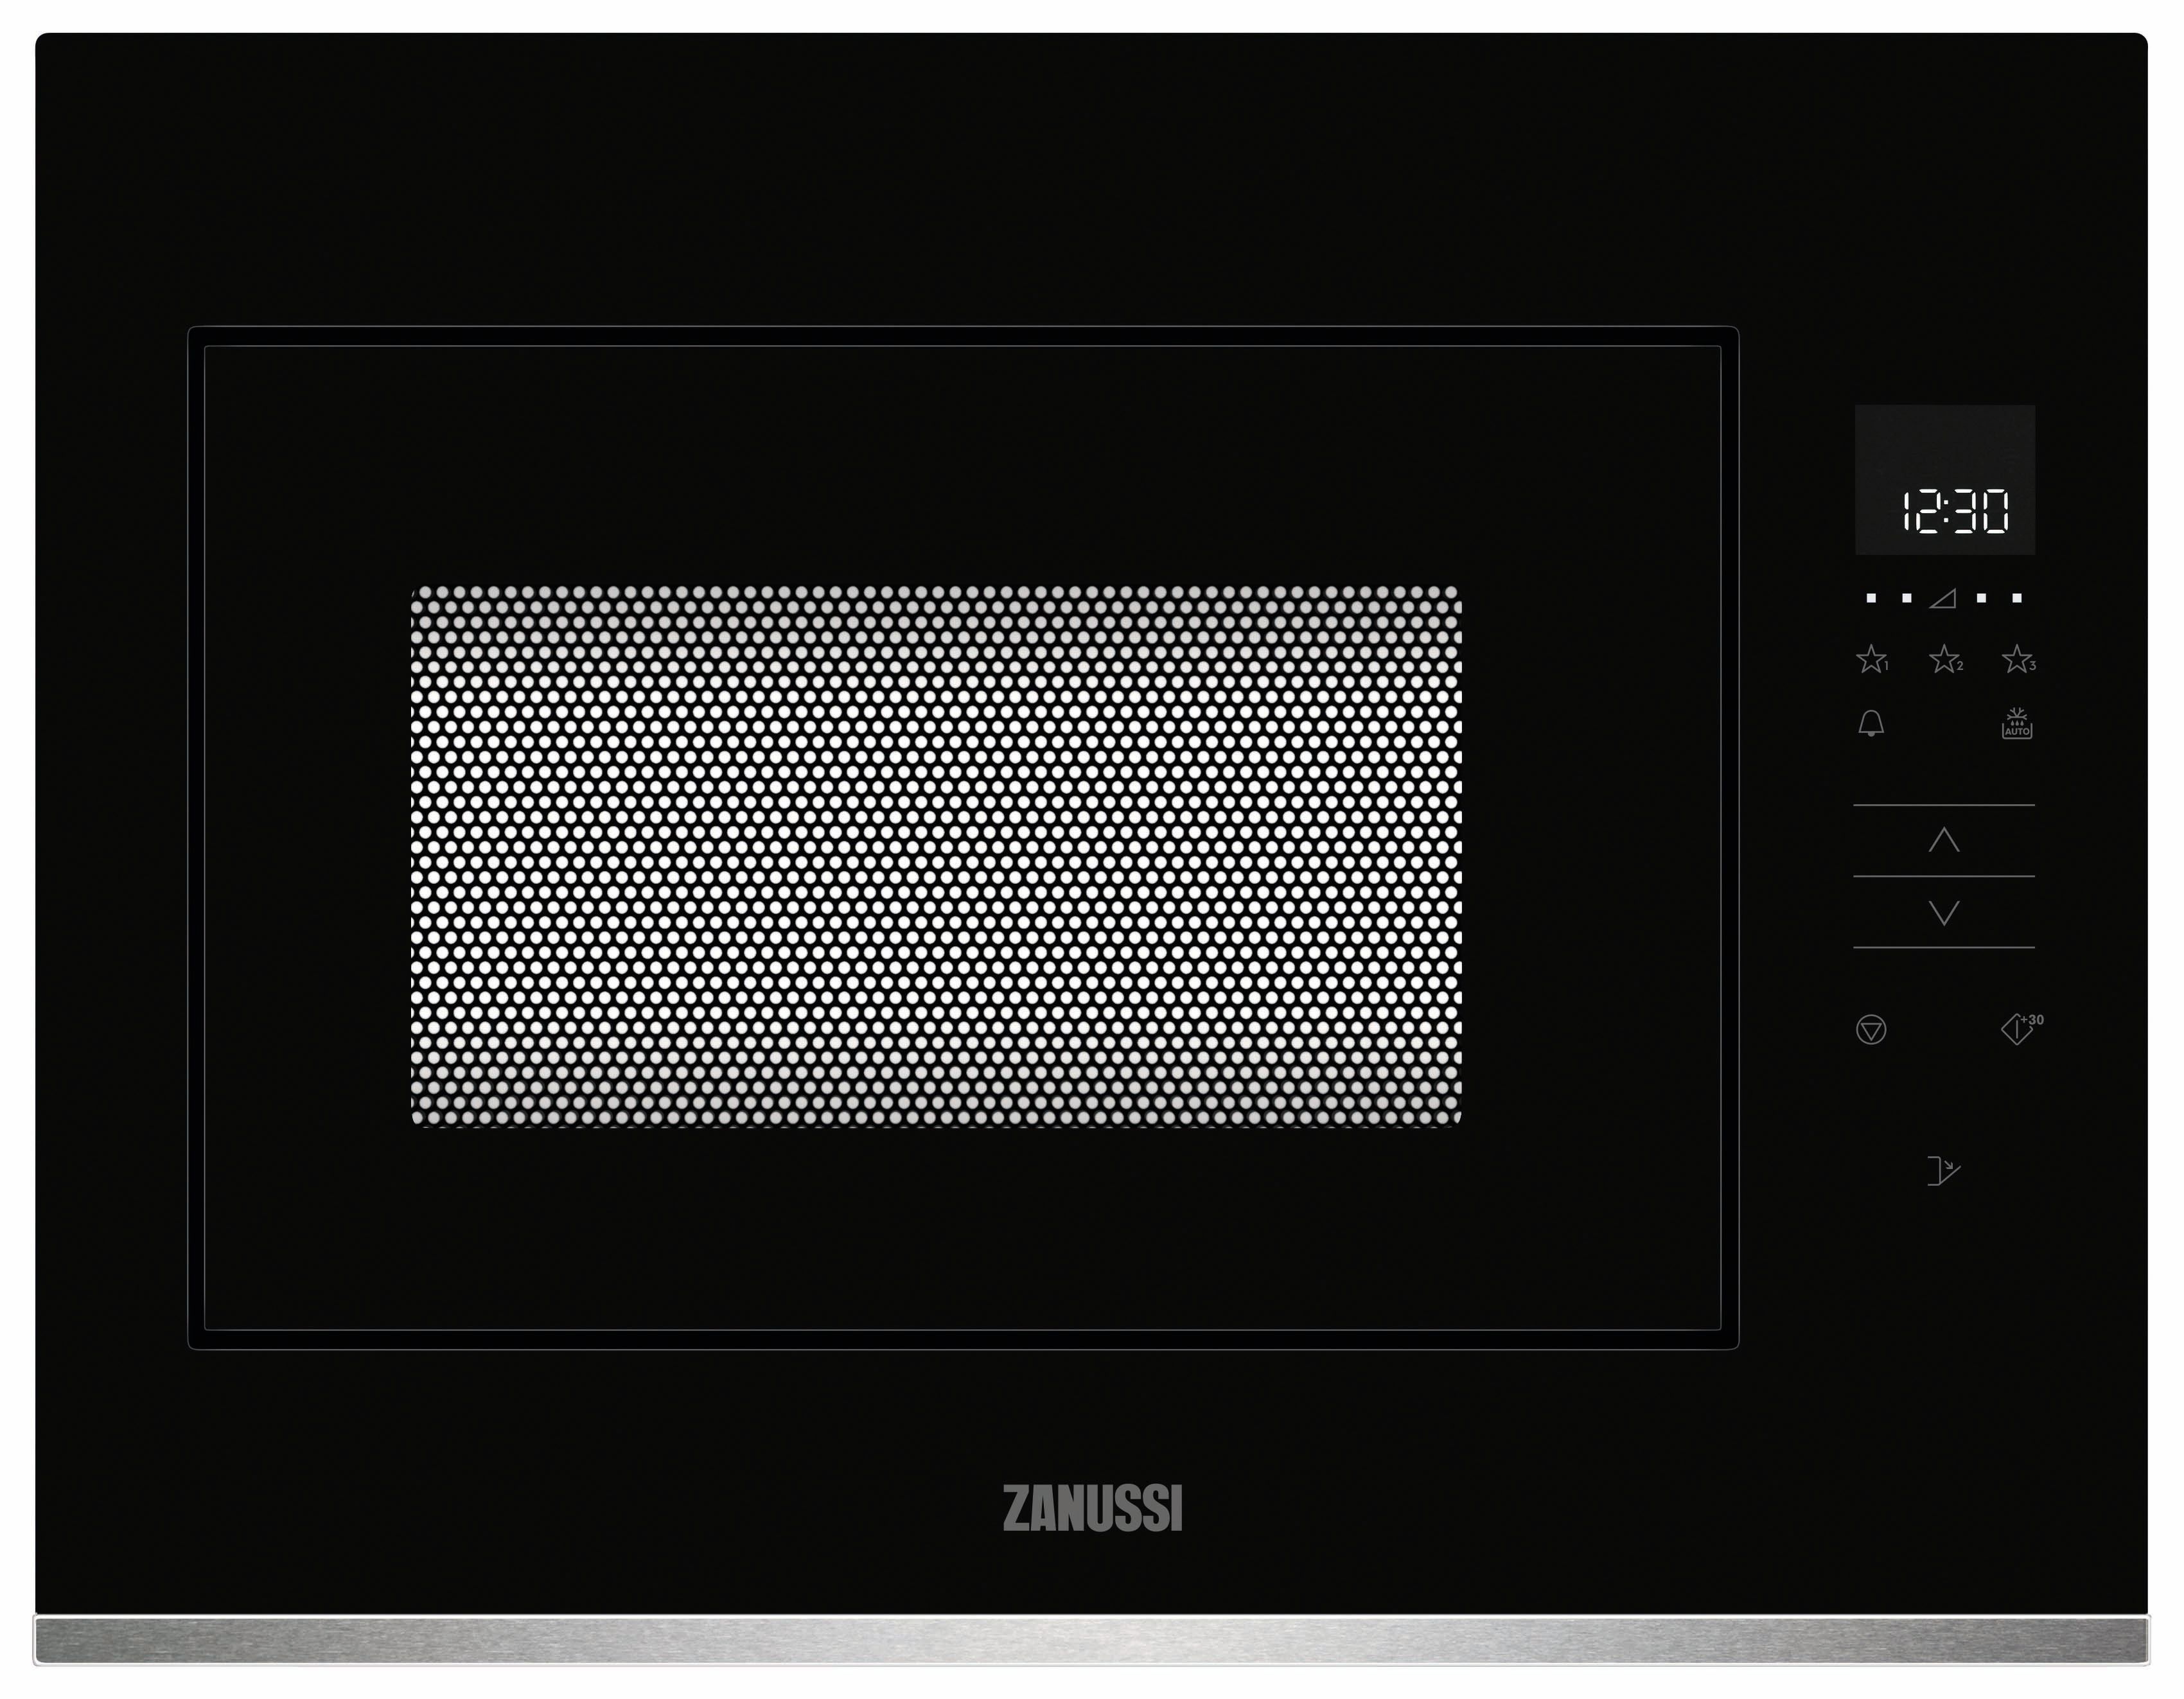 Zanussi ZMBN4SX 900W Microwave Oven - Black & Stainless Steel